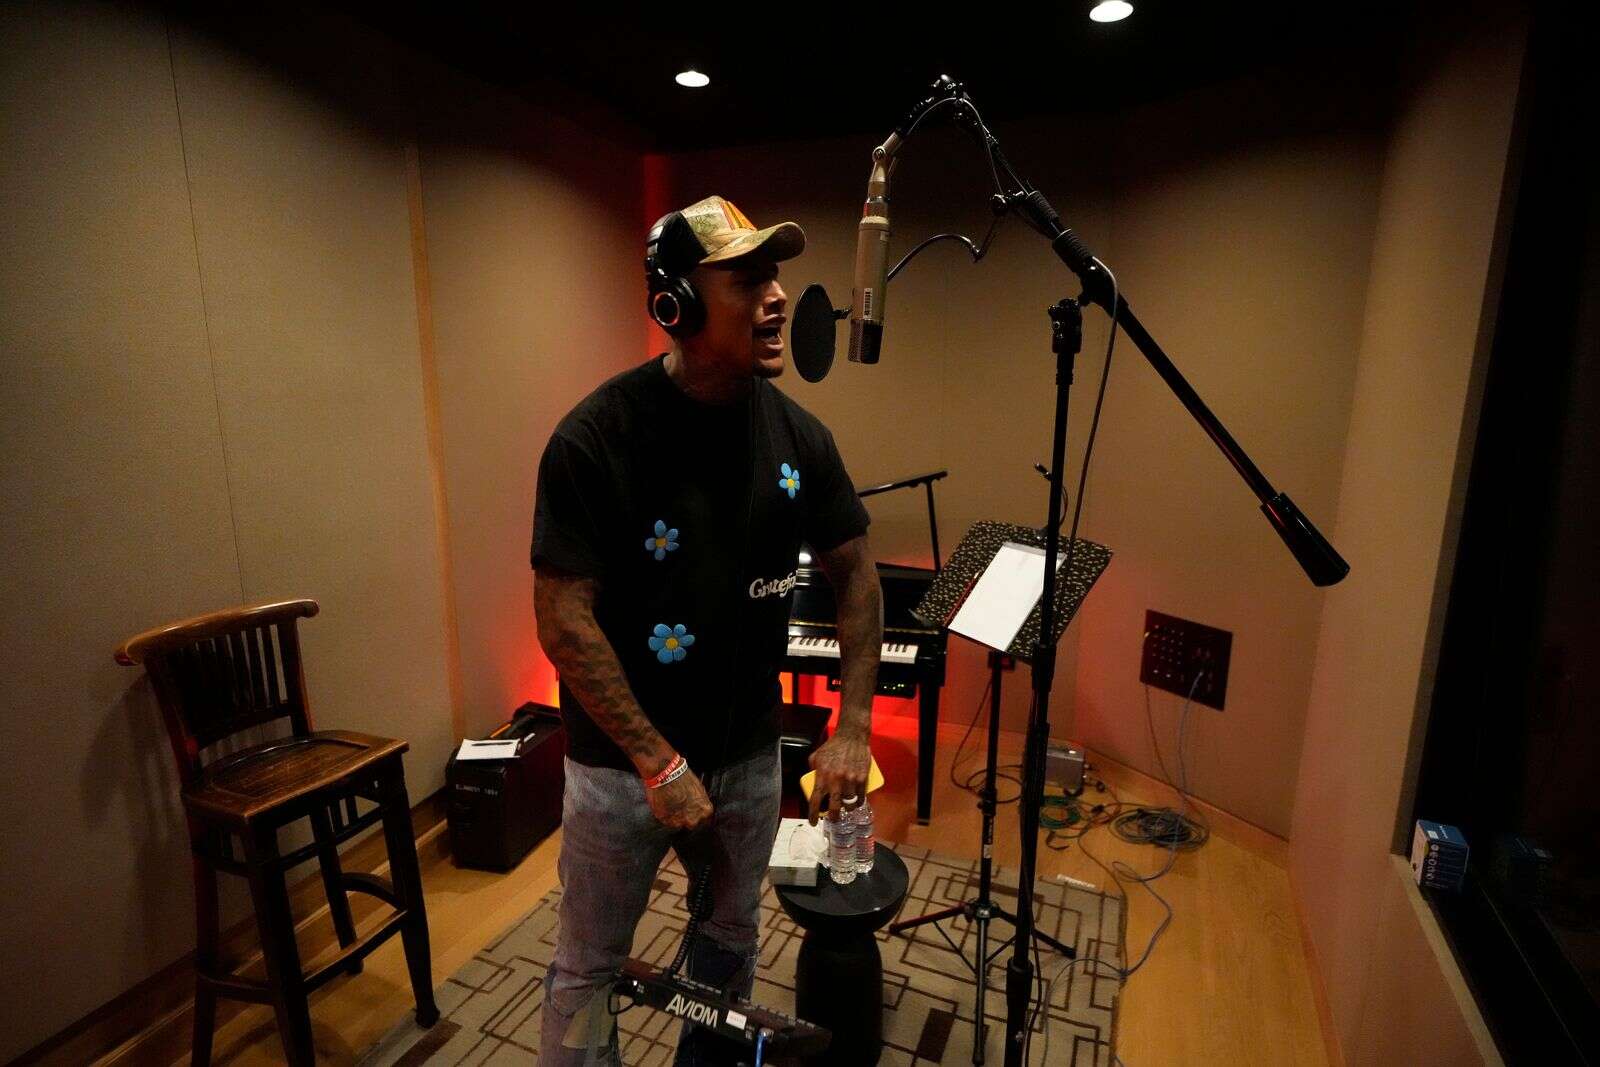 NFL players follow musical passion to create songs featured on